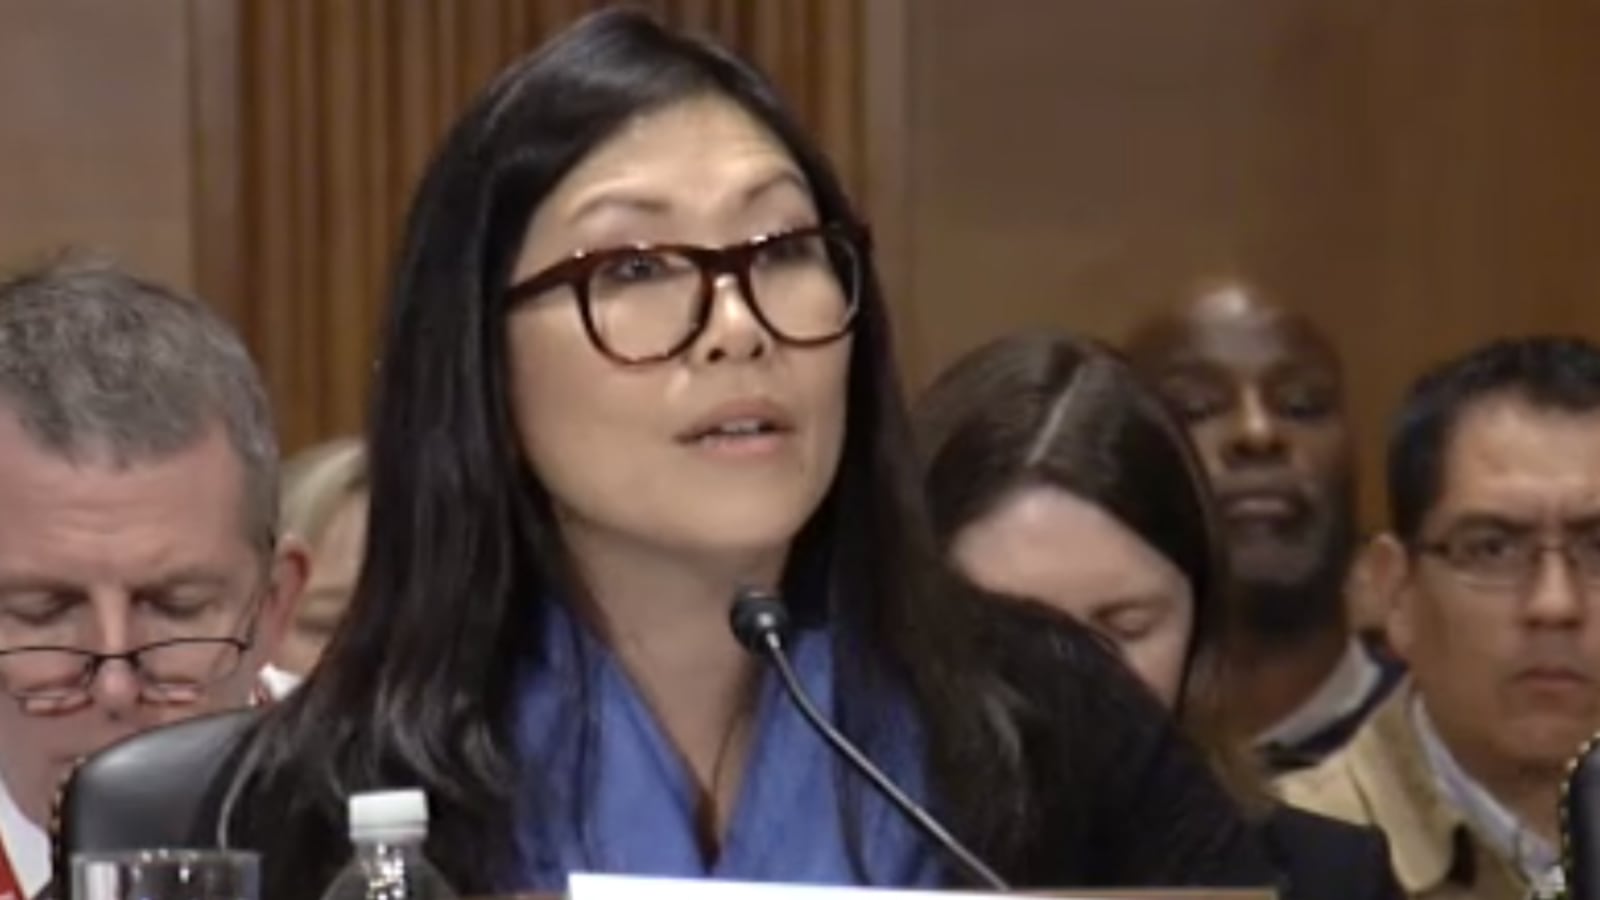 Earth School teacher Jia Lee is running for New York lt. governor. An advocate against high-stakes testing, she spoke about the issue in 2015 before the U.S. Senate Health, Education, Labor and Pensions Committee.